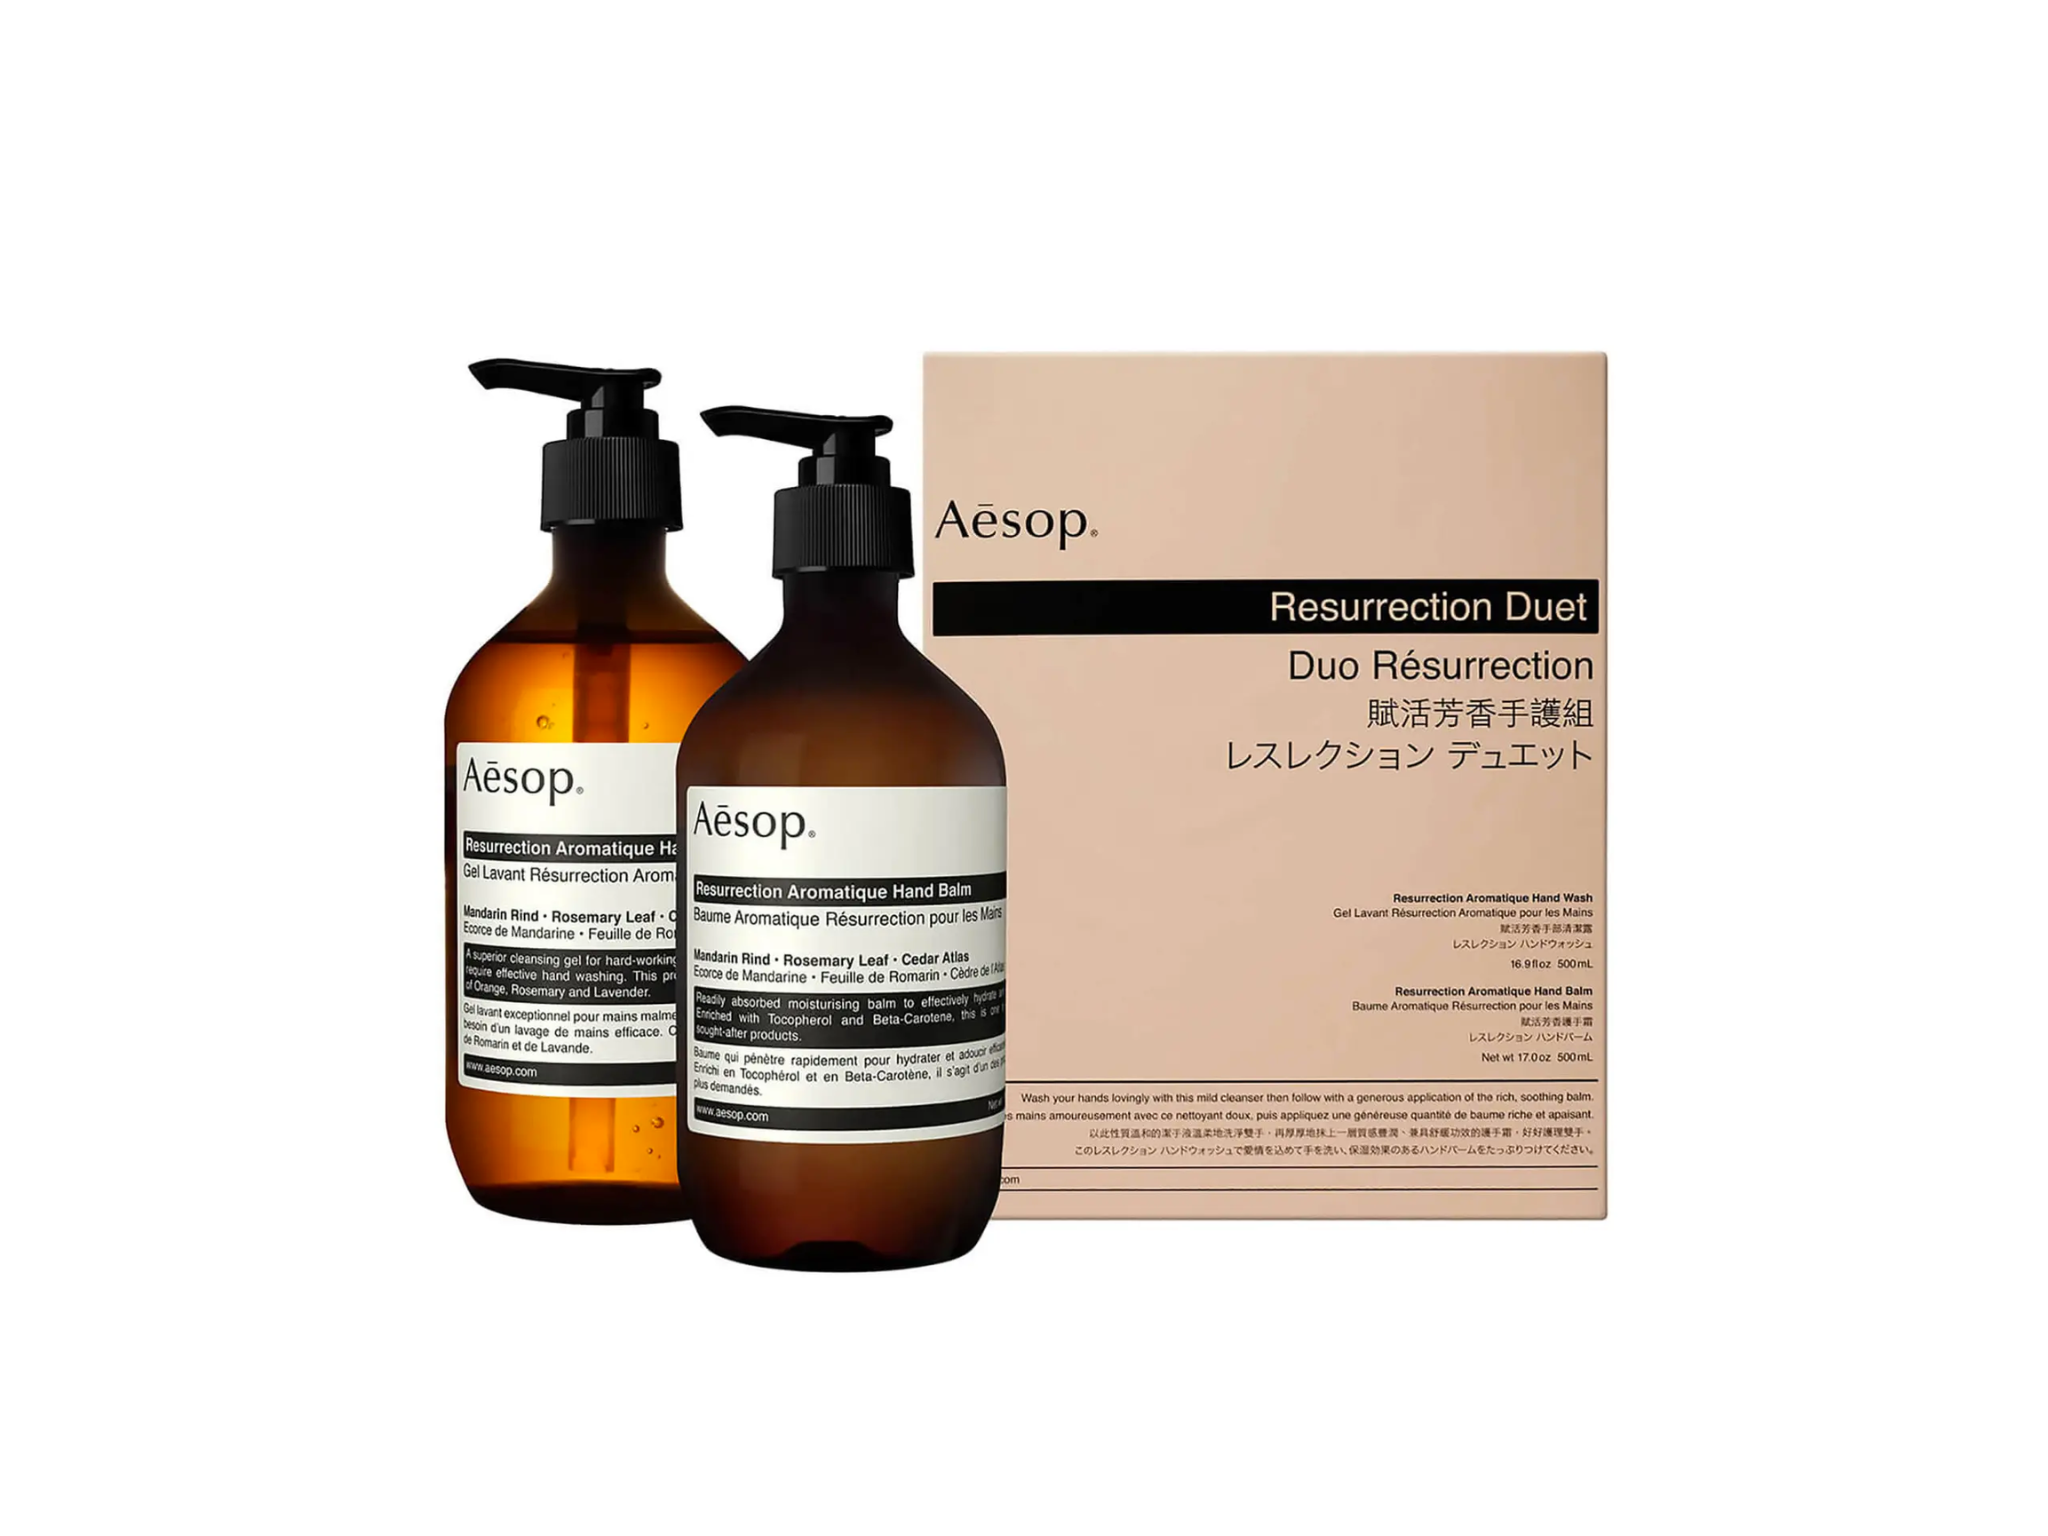 aesop, cyber monday, indybest, black friday, get 25% off aesop’s marrakech intense parfum and geranium leaf balm in the cult beauty cyber monday sale